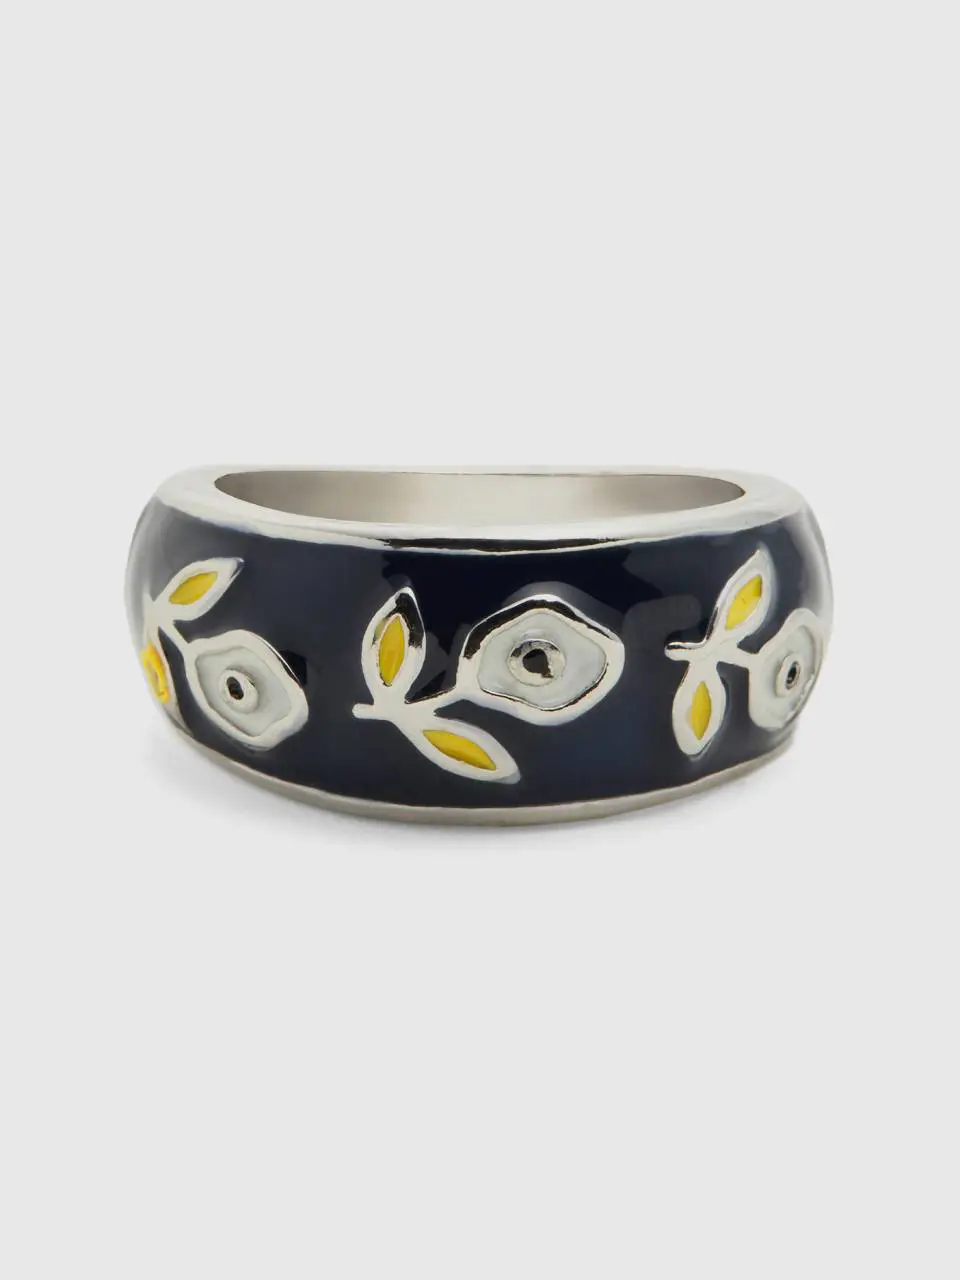 Benetton dark blue band ring with white flowers. 1